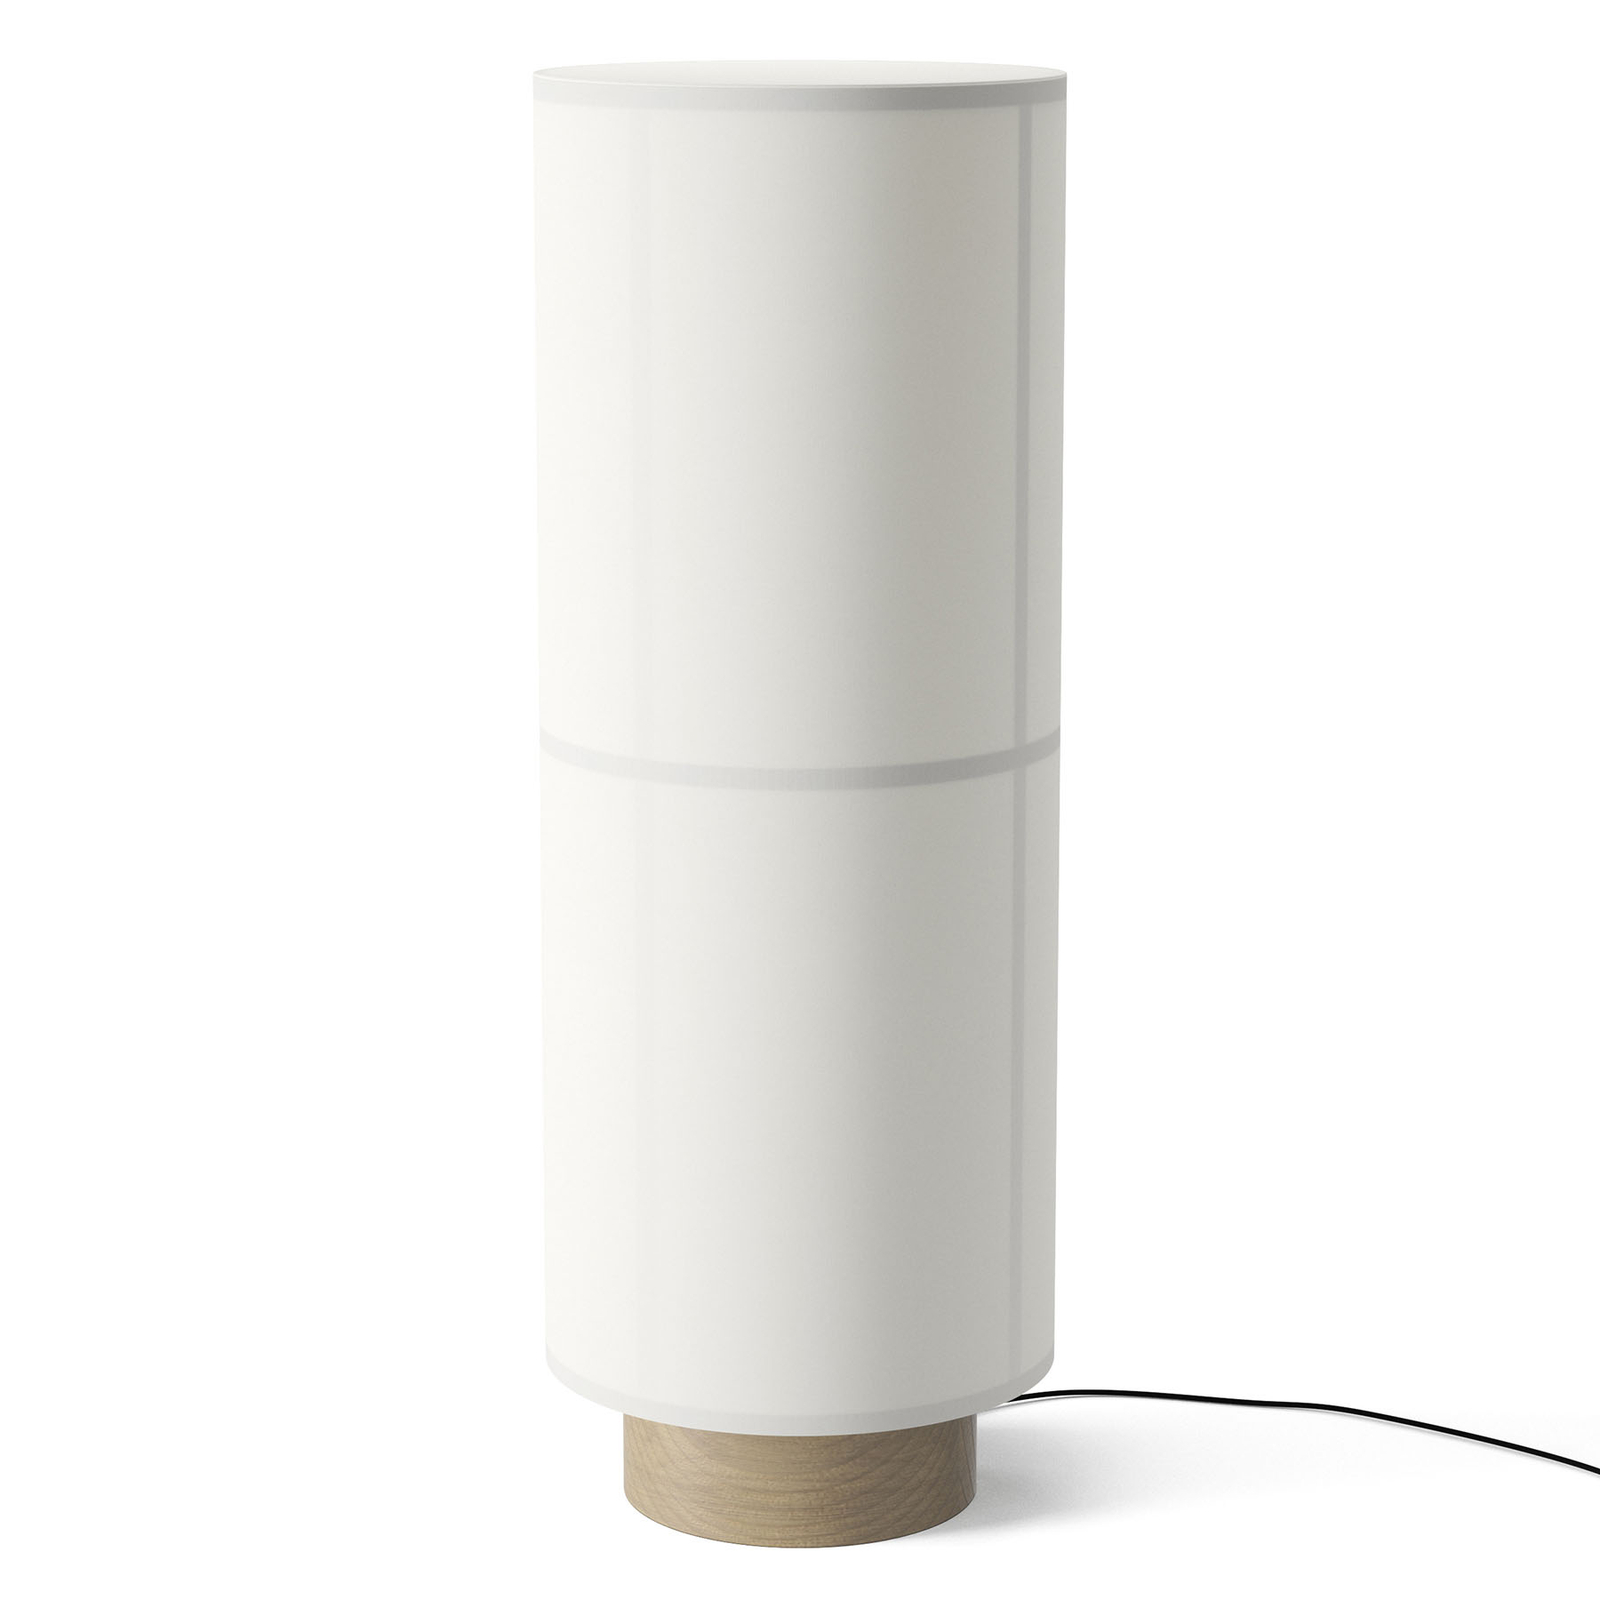 Audo Hashira floor lamp with a dimmer, white